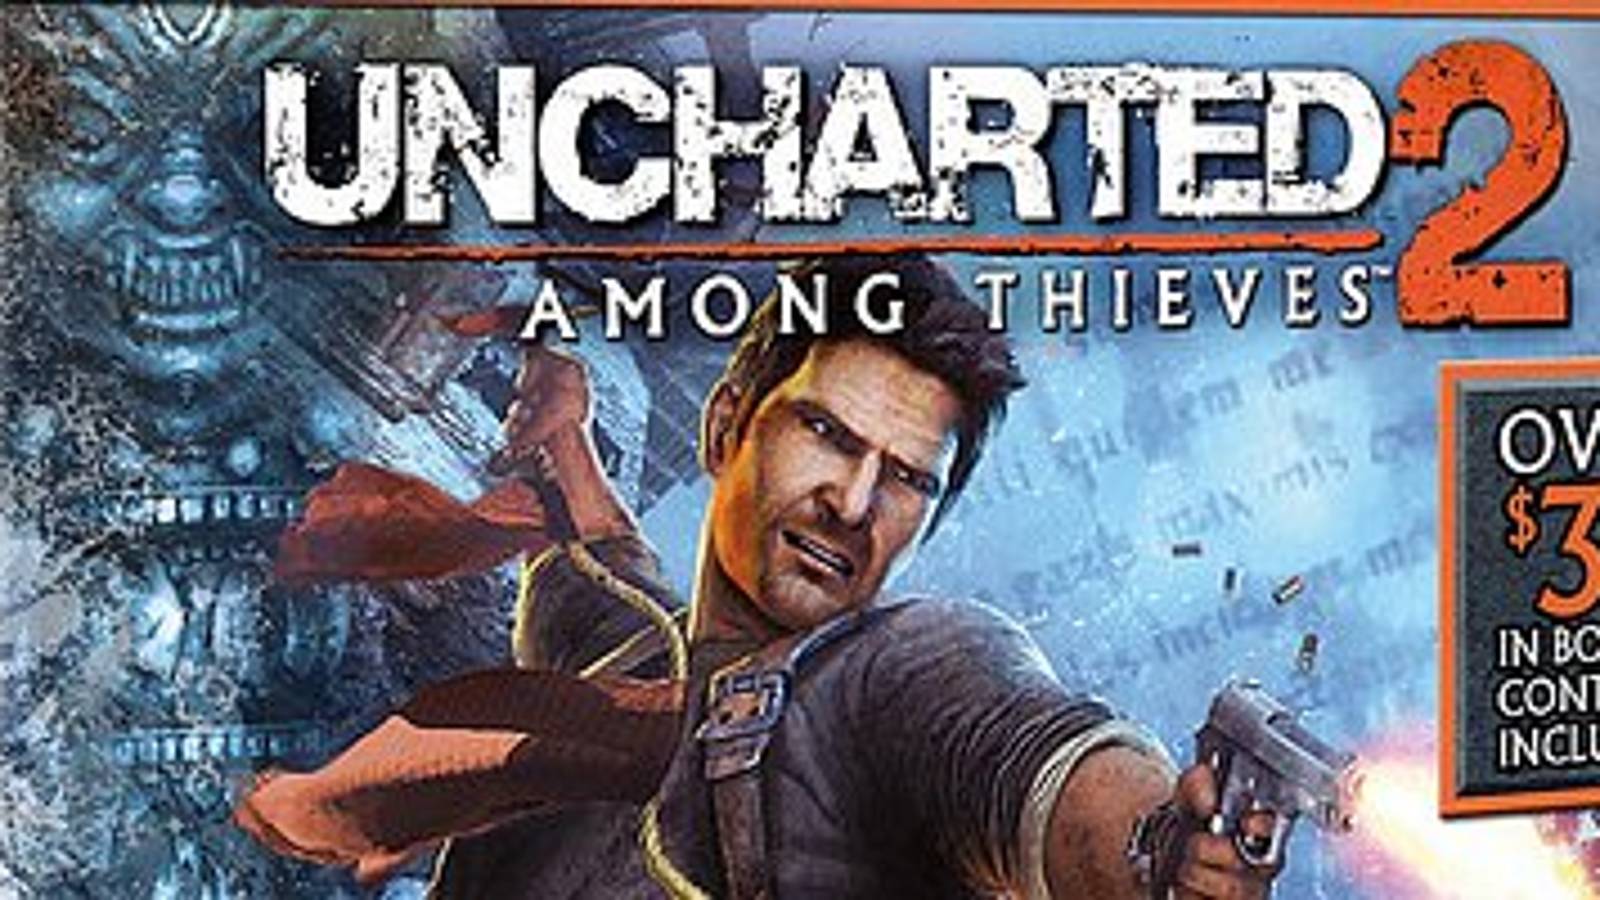 Uncharted 2 ps3. Uncharted 2 GOTY. Uncharted 3 game of year Edition. Uncharted 1 ps3. Игры game of the year edition